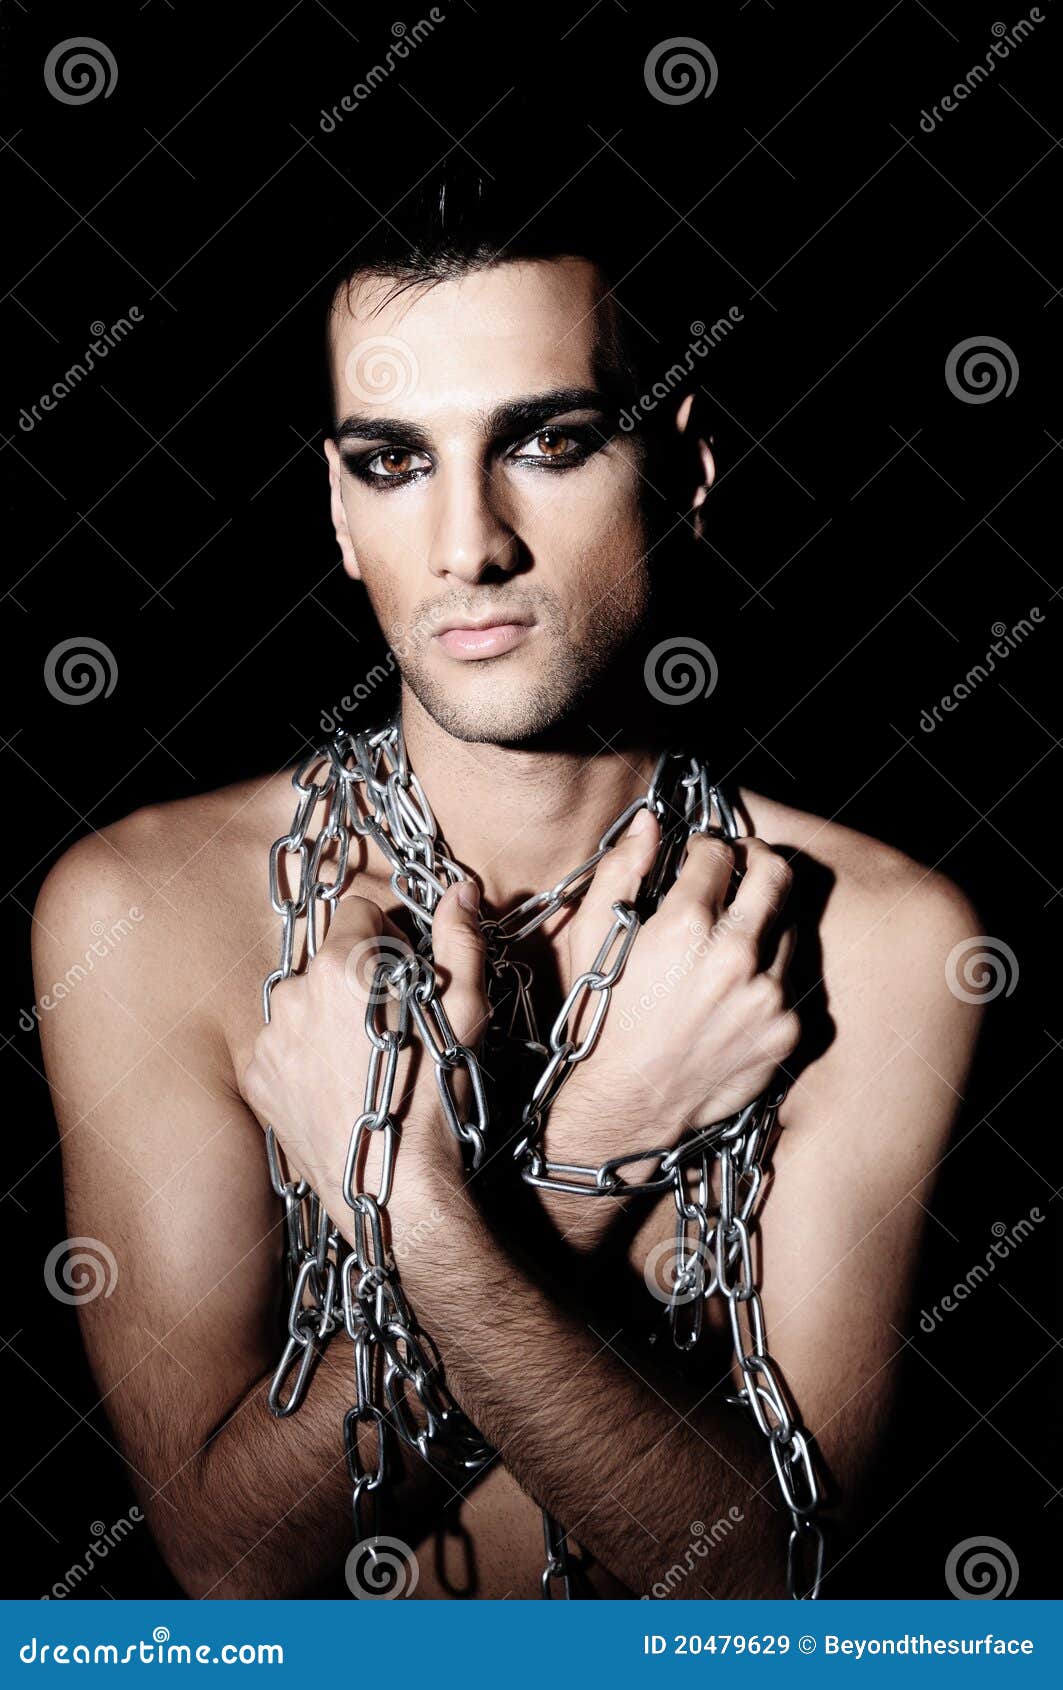 Man In Chains Royalty Free Stock Images - Image: 20479629